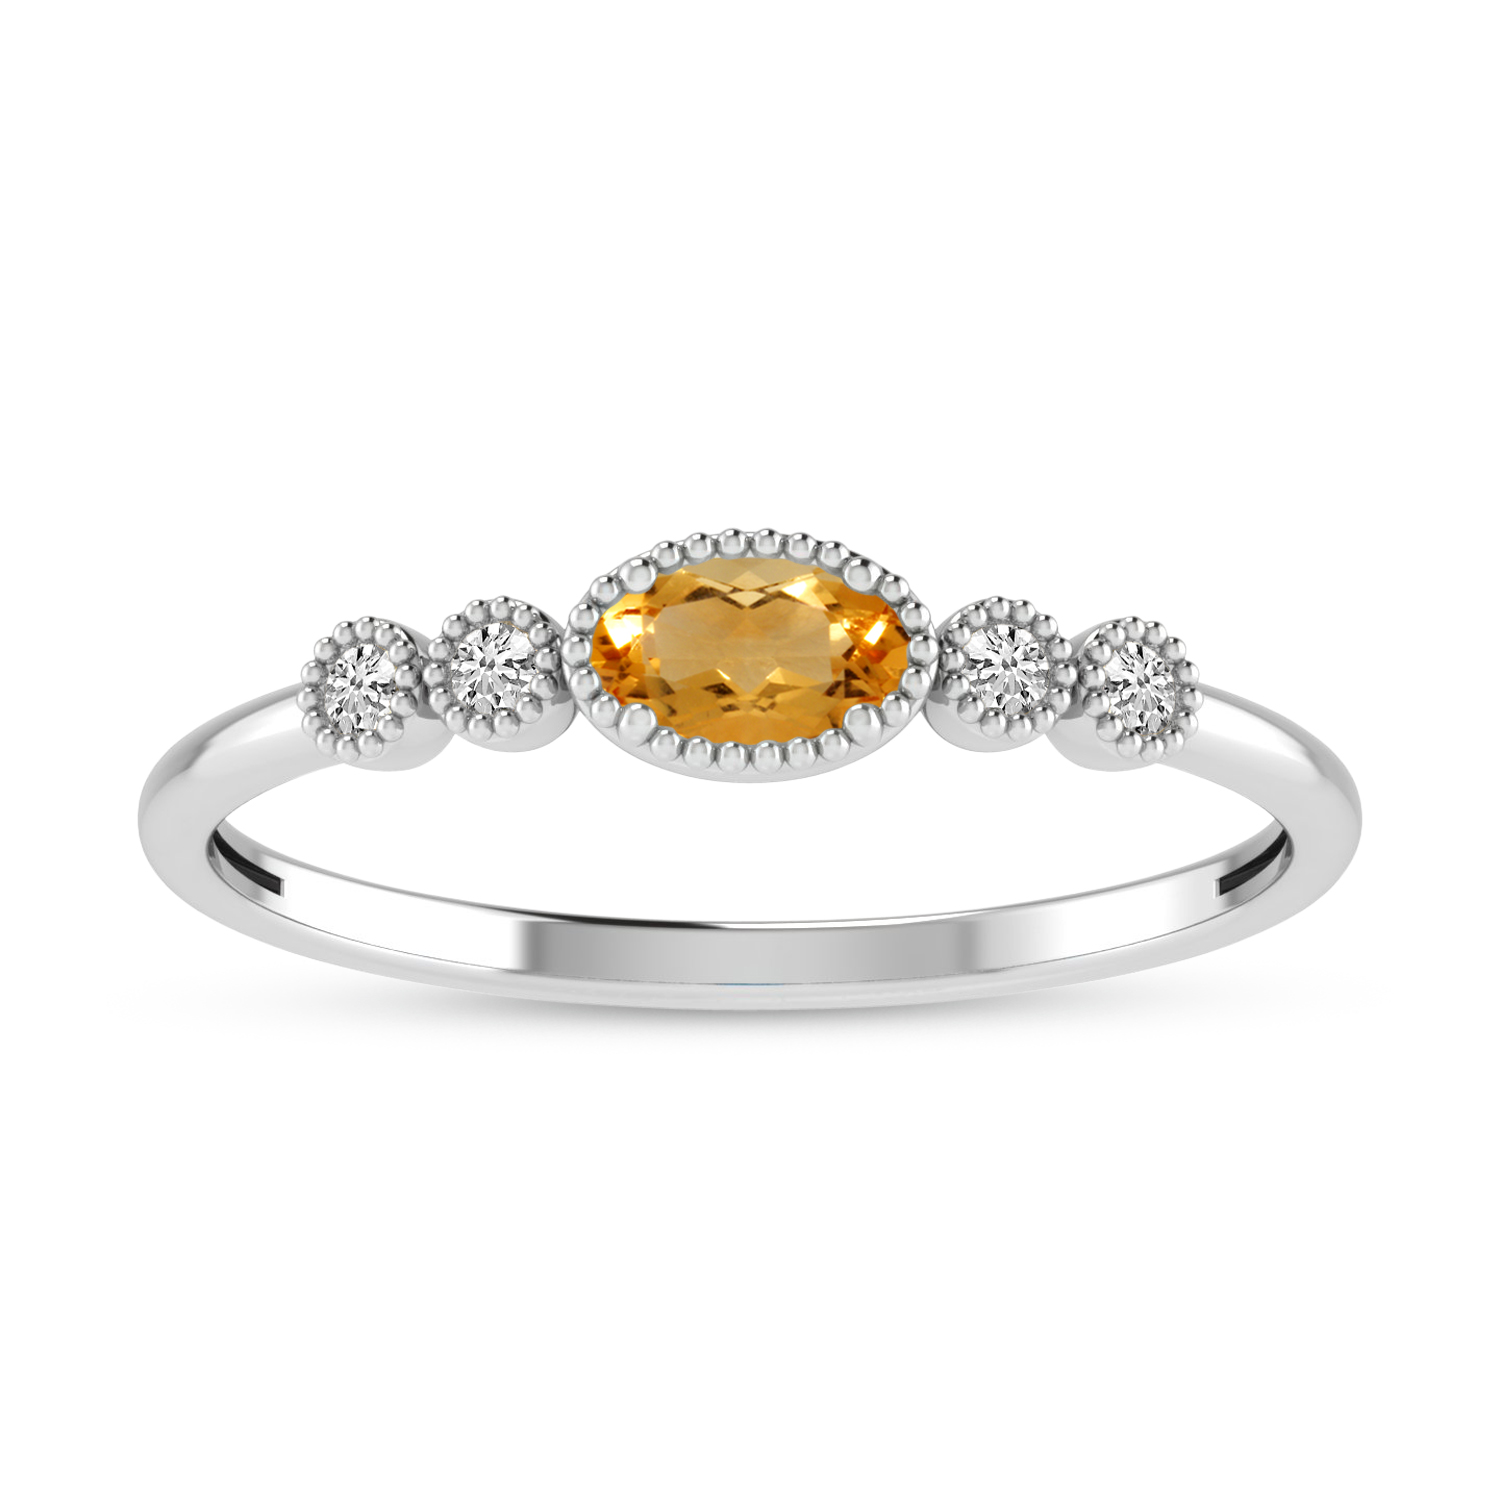 14K White Gold Oval Citrine and Diamond Stackable Ring